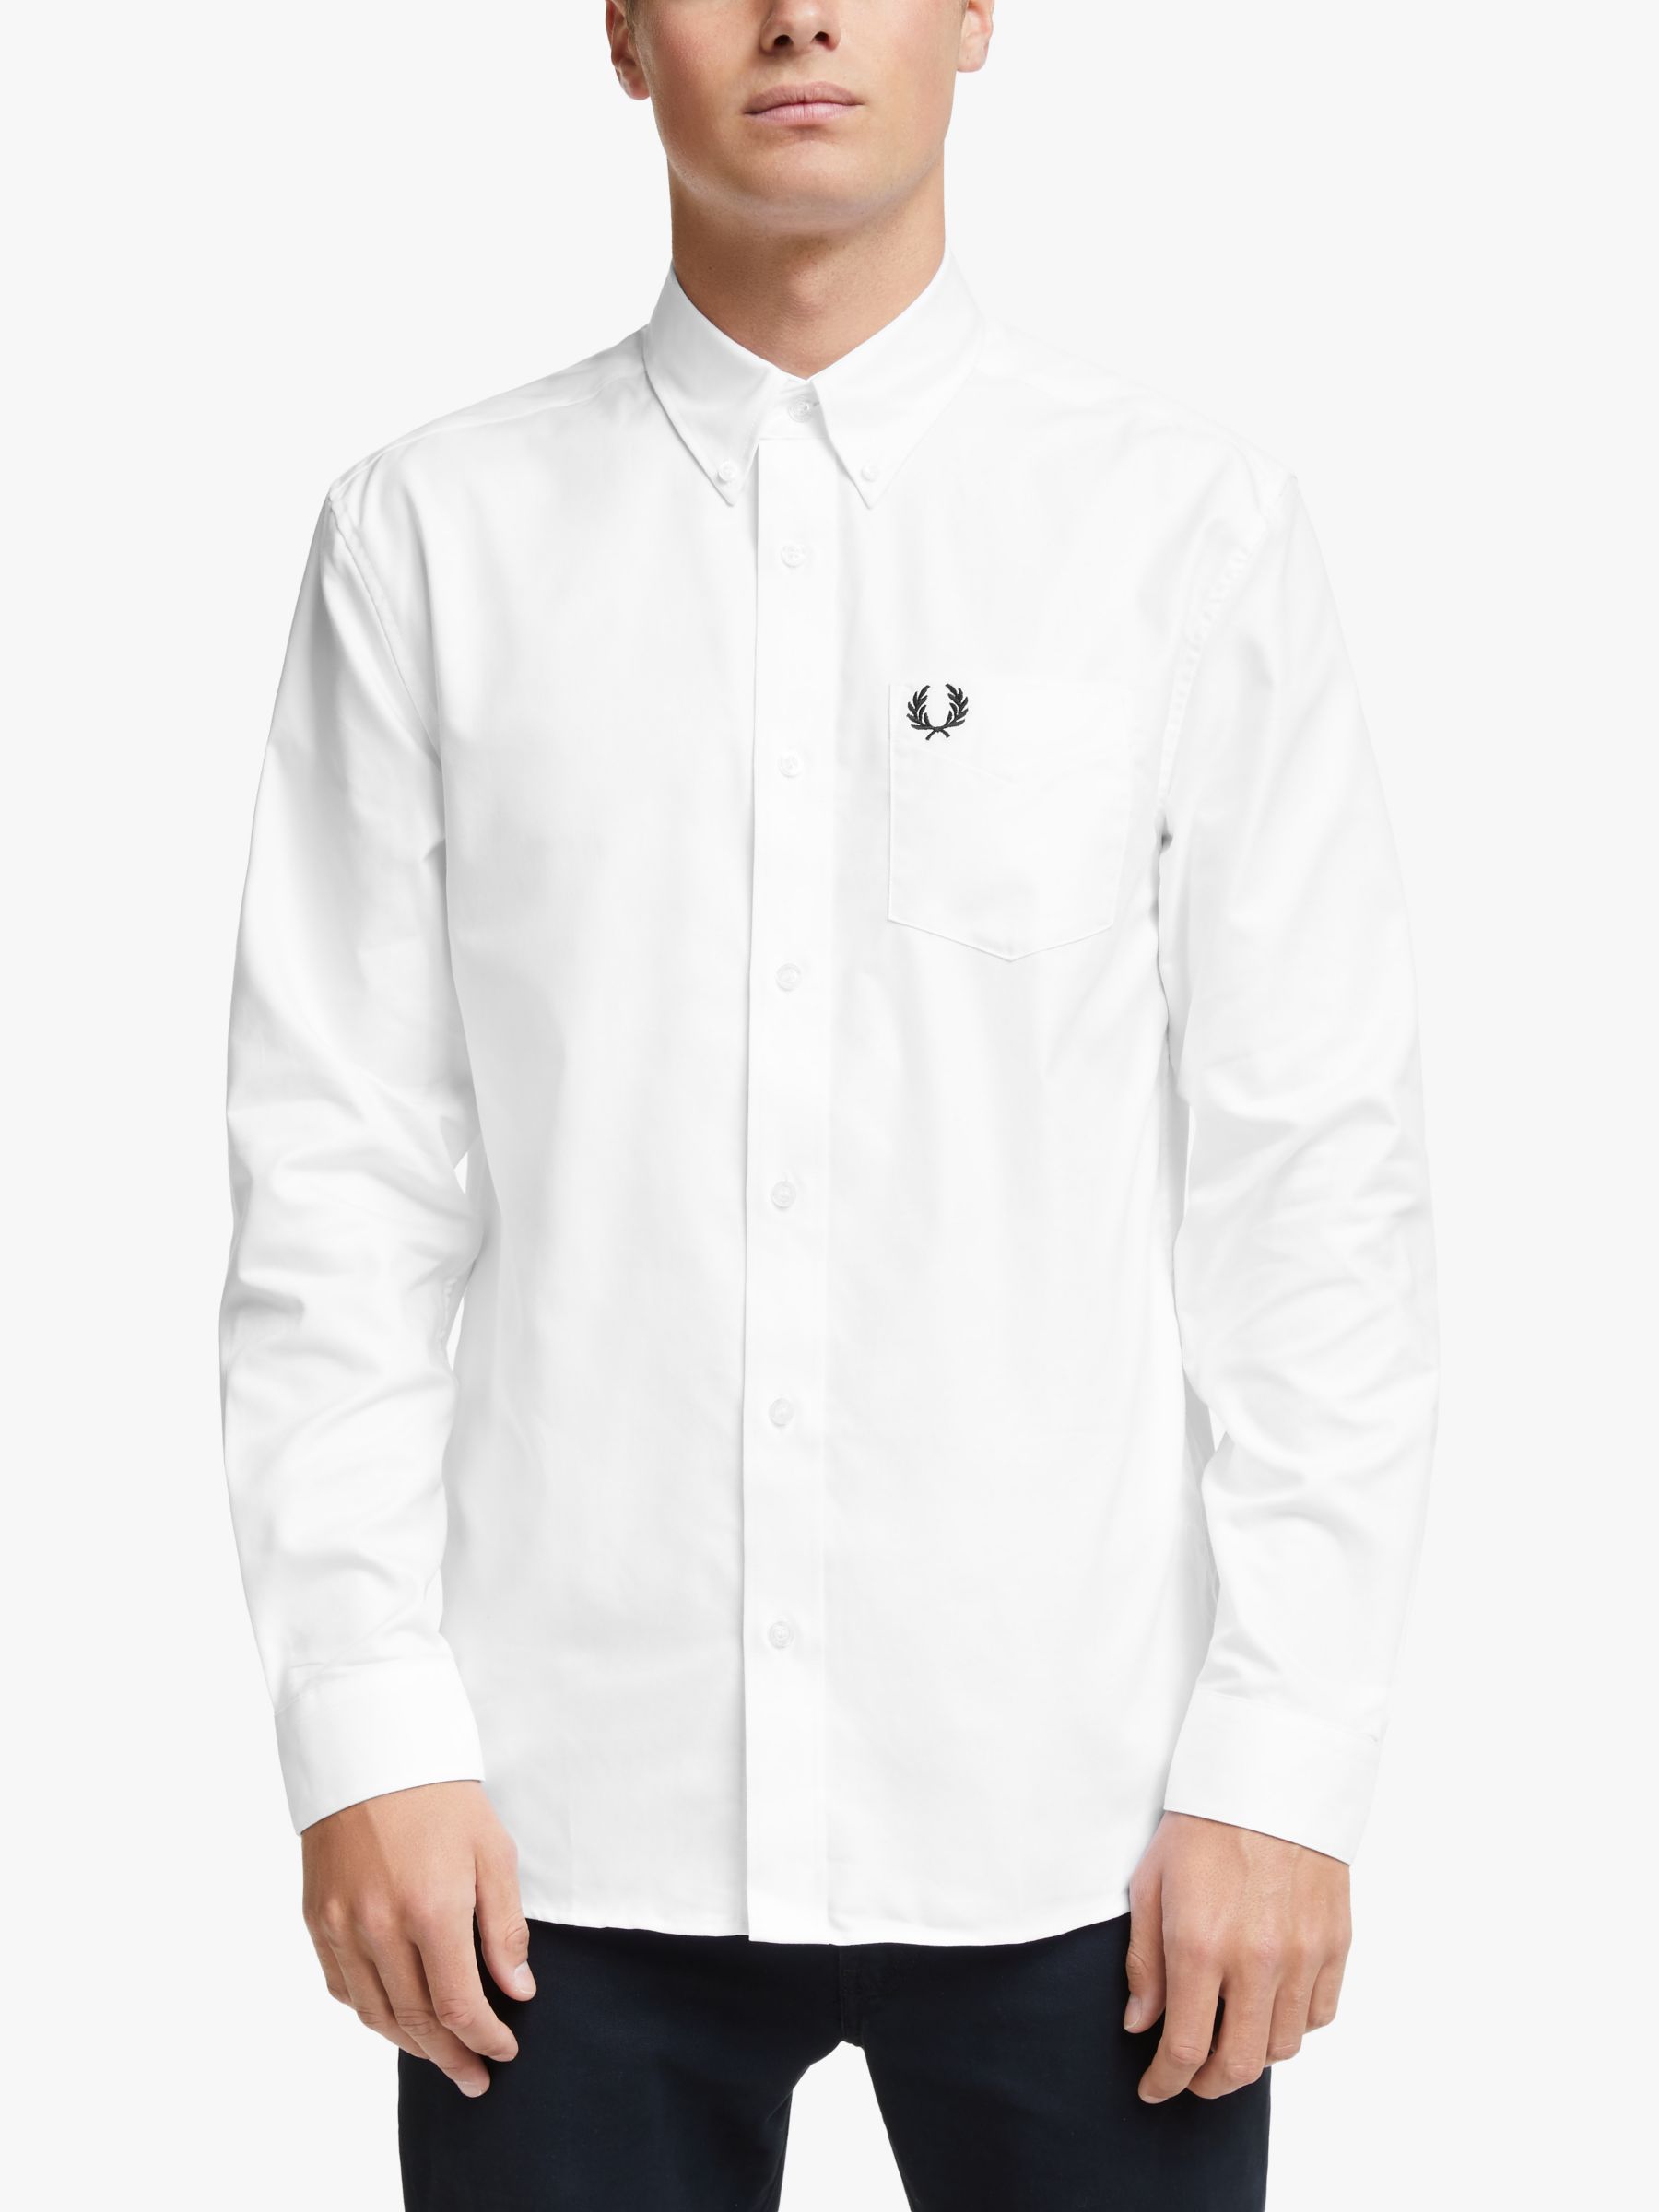 Fred Perry Long Sleeve Oxford Shirt, White at John Lewis & Partners